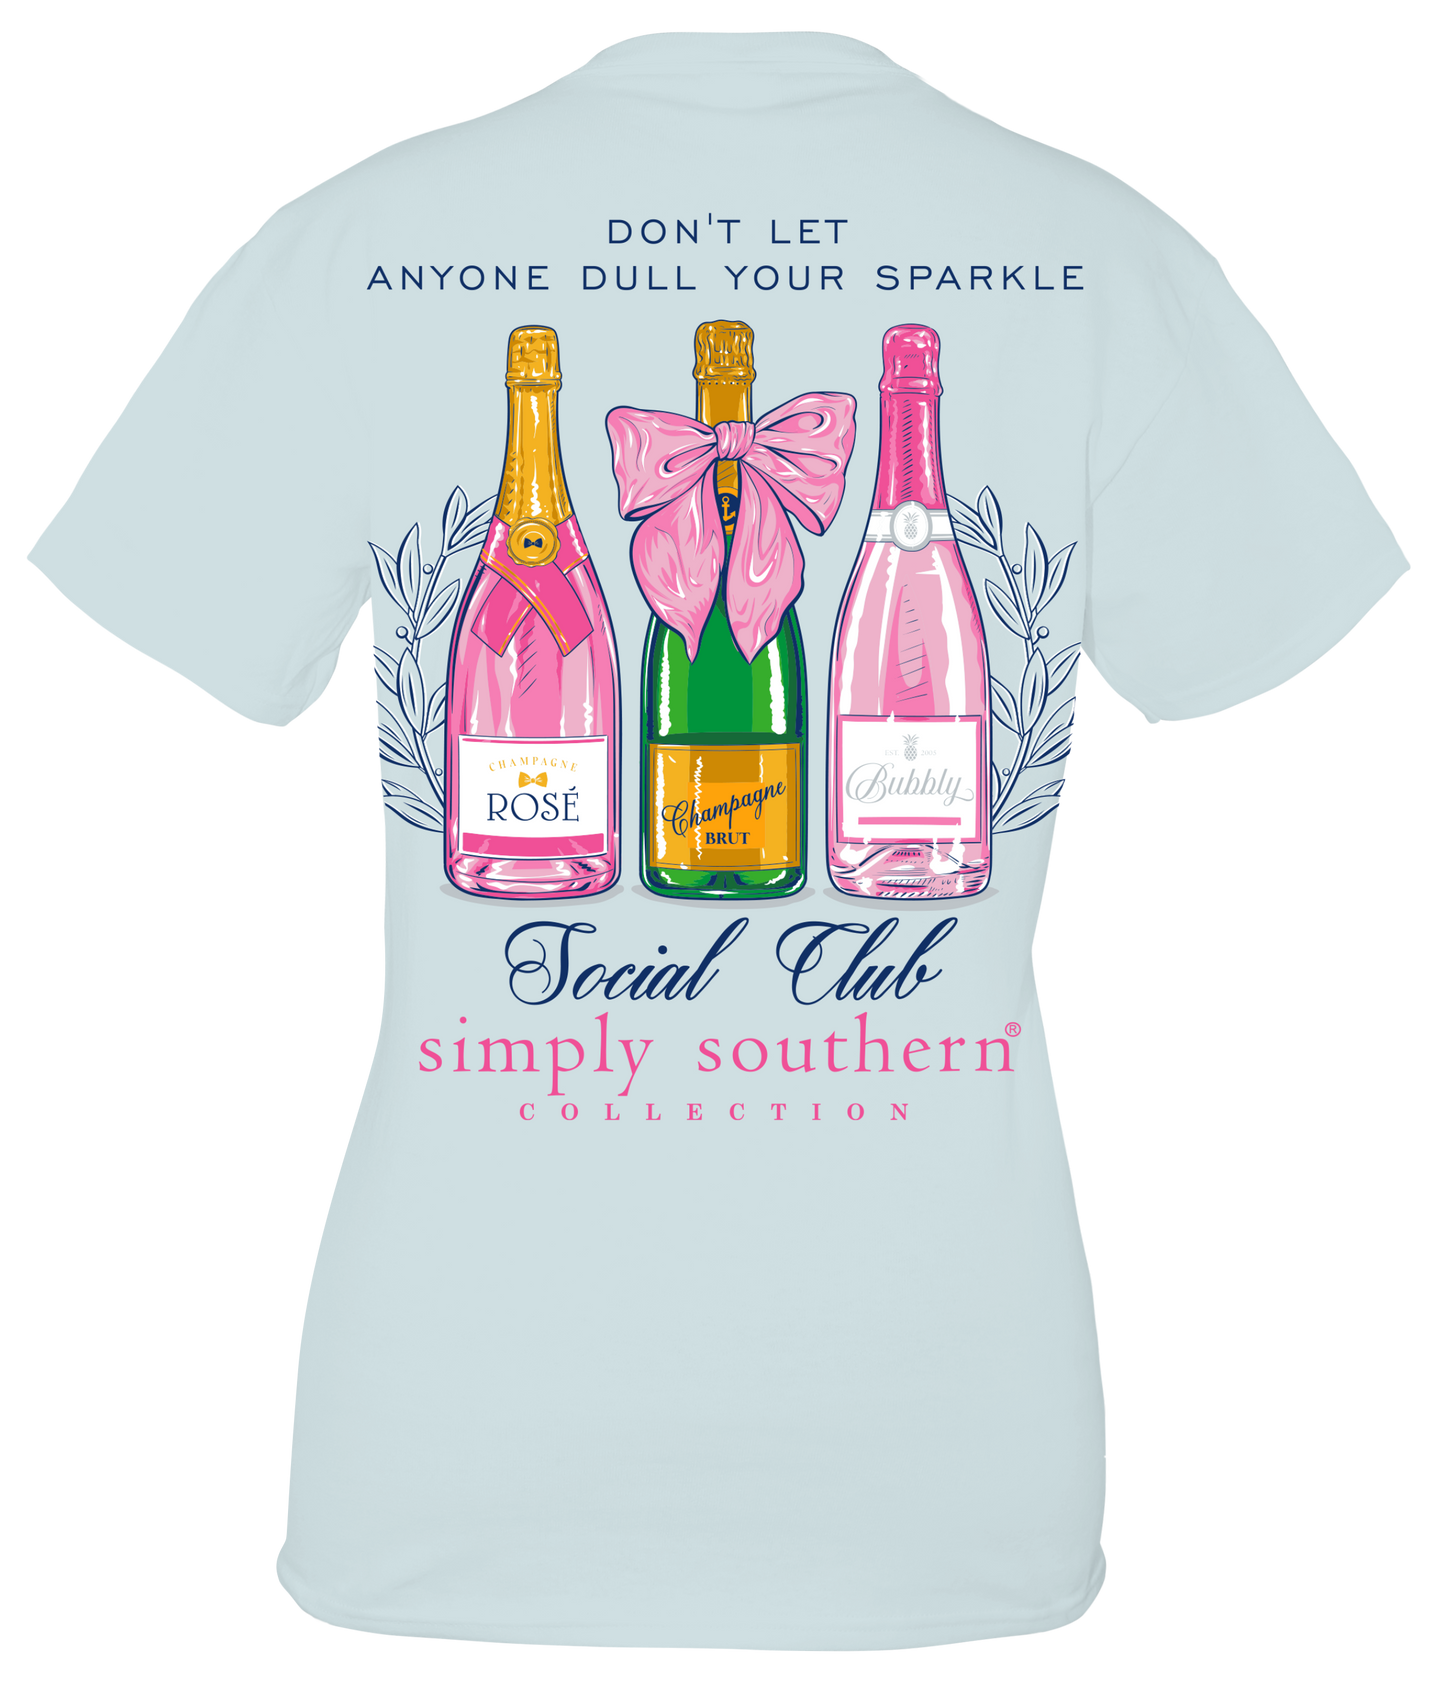 "Don't Let Anyone Dull Your Sparkle" Social Club Shirt